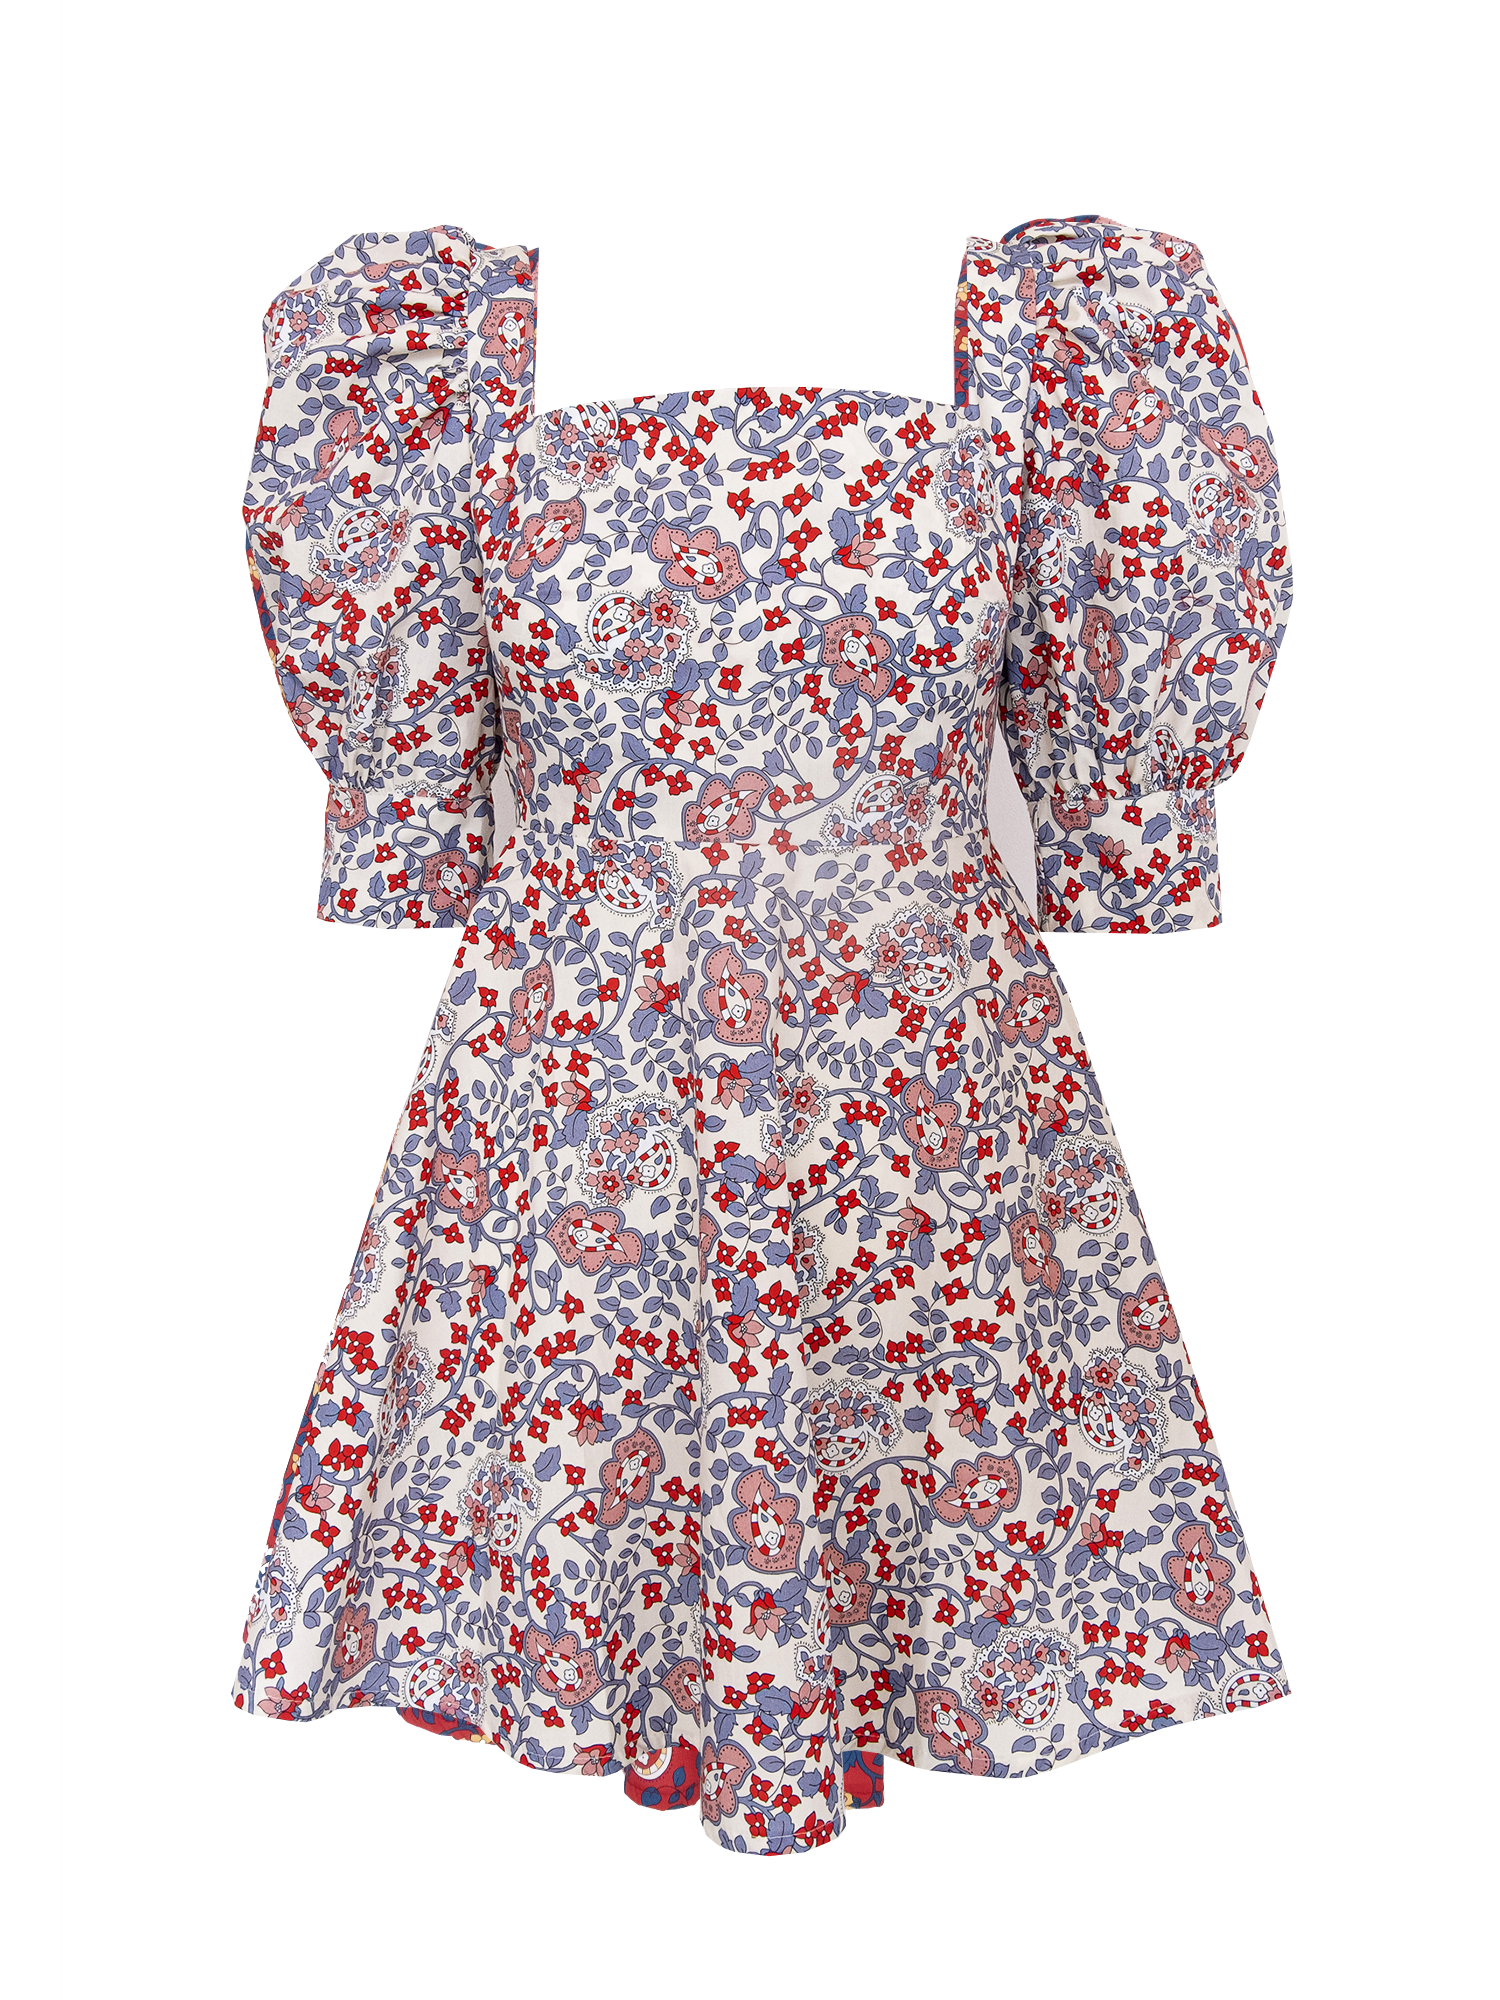 MIMOSA - dress with square neck and puffball sleeves in cotton Kew print